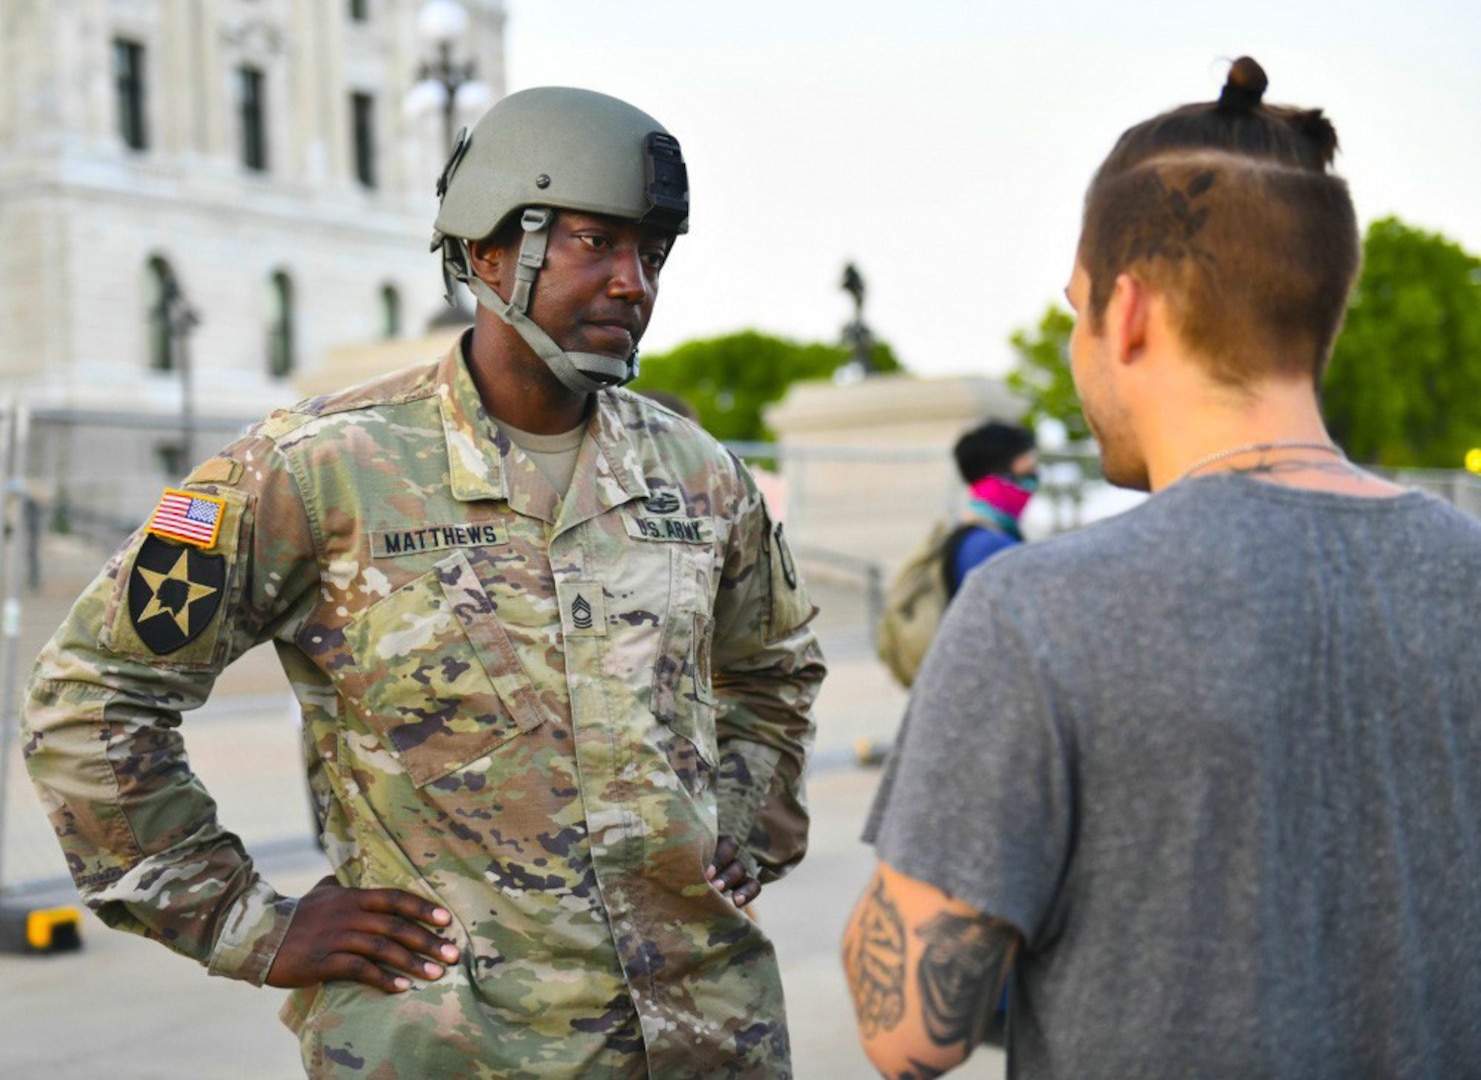 Minnesota National Guard Master Sgt. Acie Matthews Jr. peacefully engages with protesters to show solidarity and request compliance with the state curfew at the grounds of the Minnesota state capitol in St. Paul, June 1, 2020.